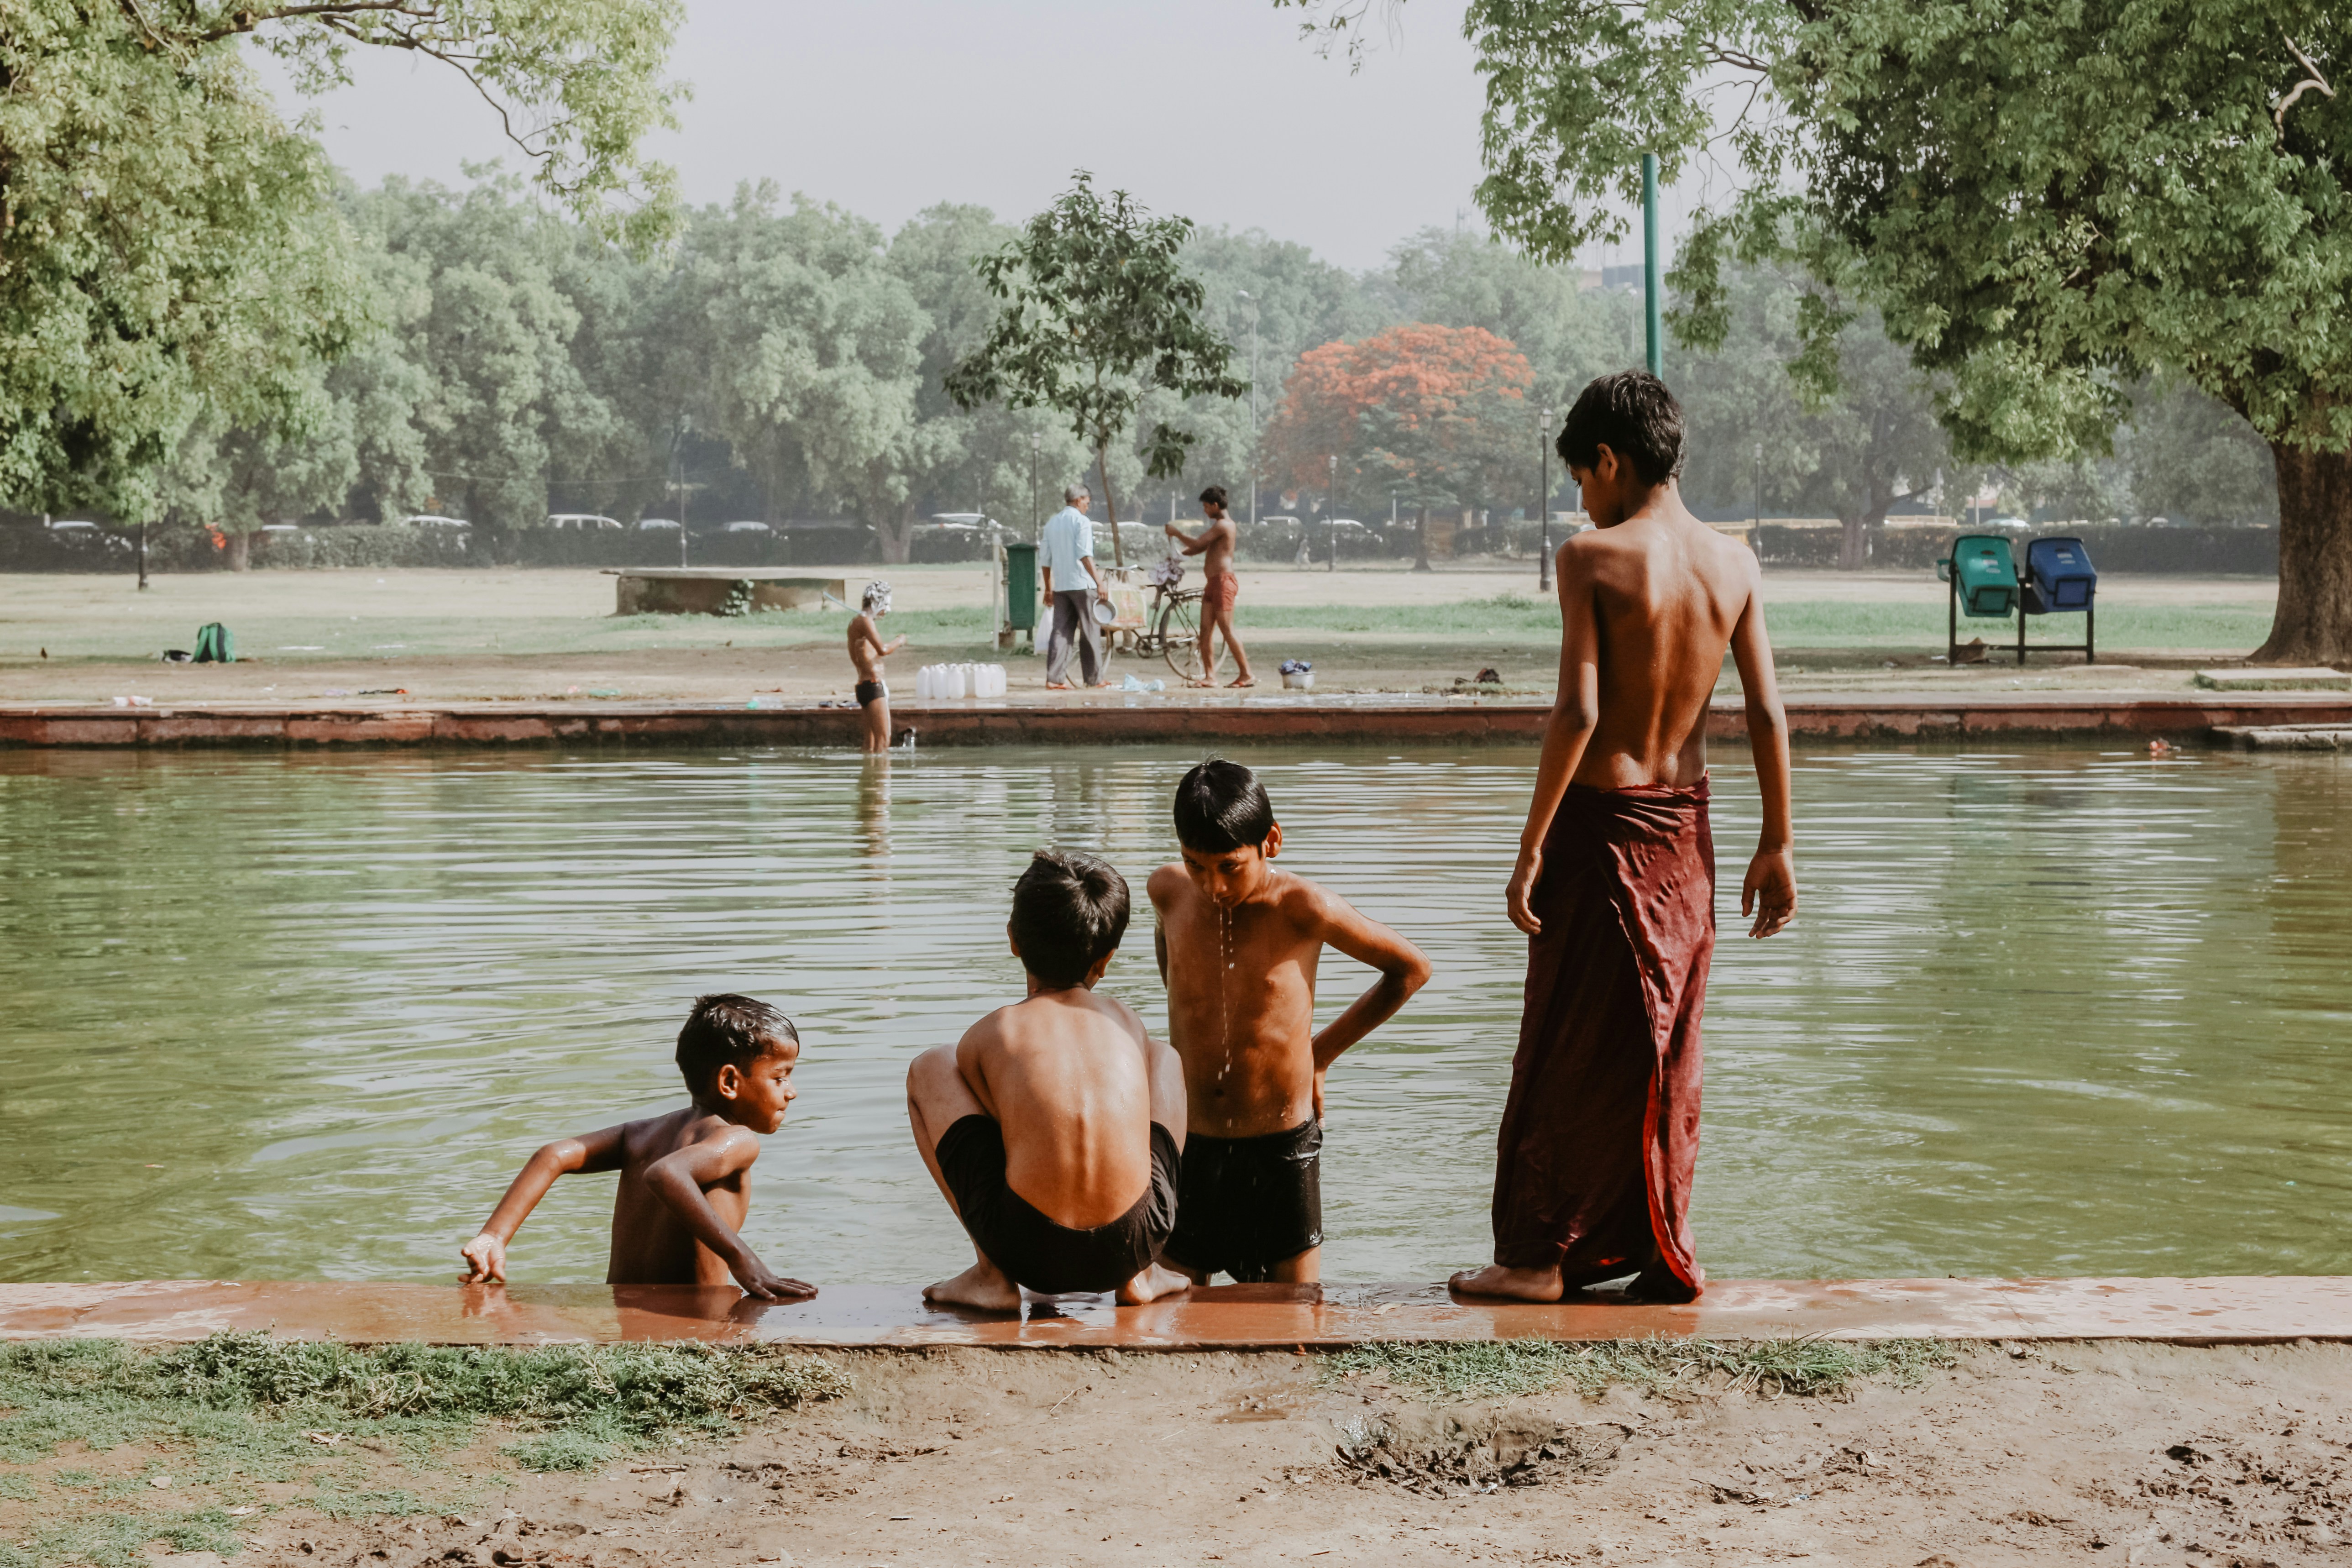 In the long term, a city life structure like Delhi is not sustainable if heat waves and climate disasters increase. : Ibrahim Rifath Unsplash